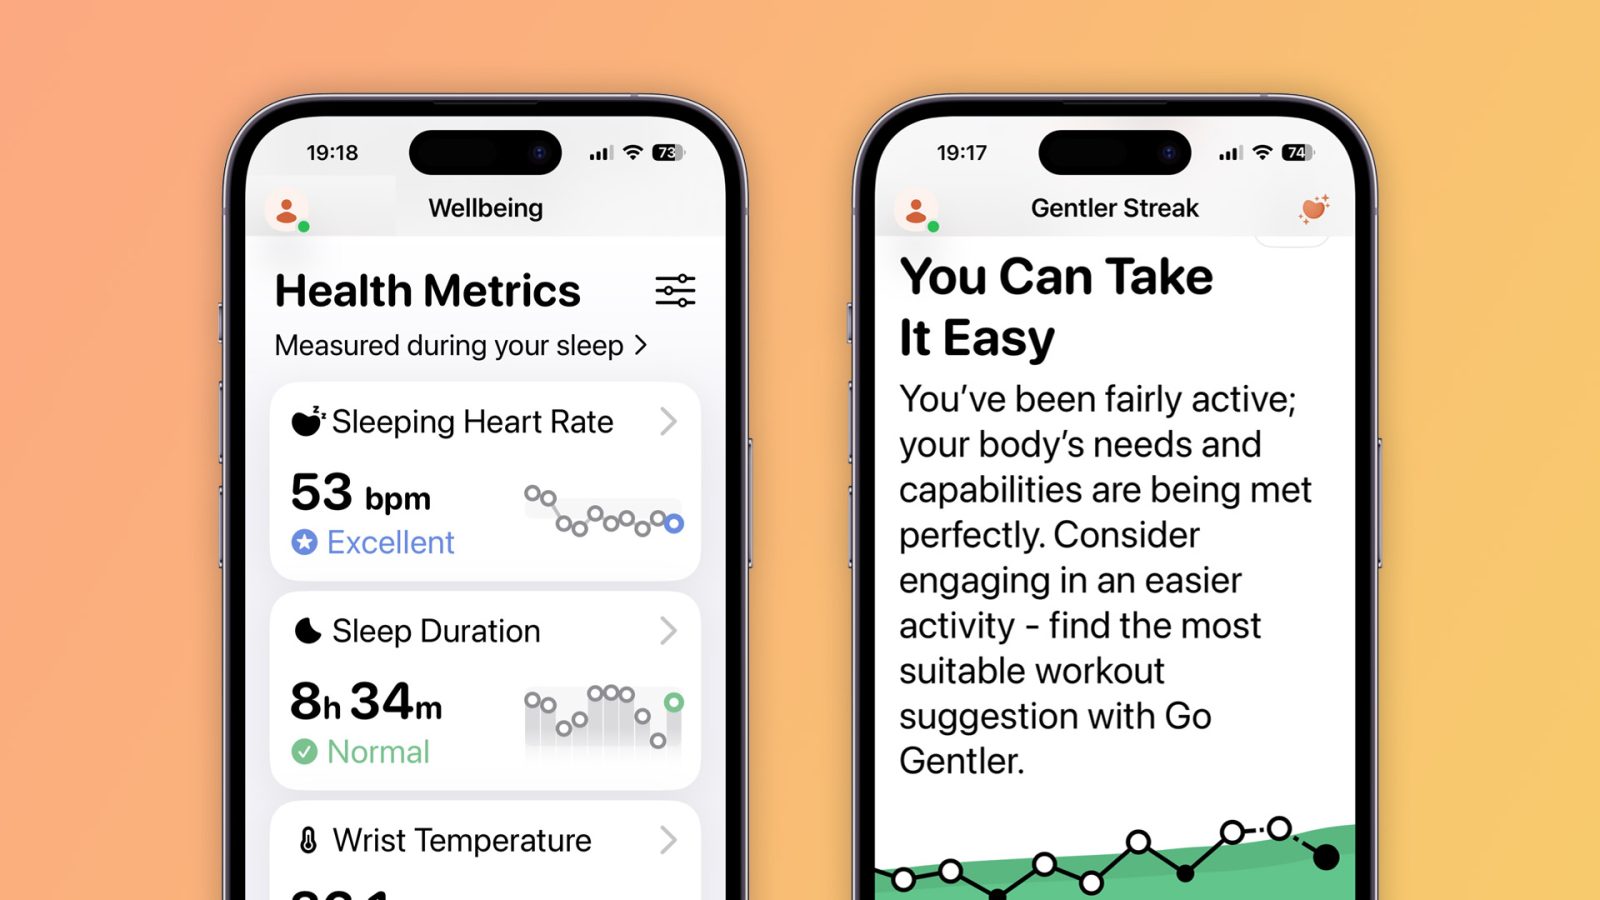 Gentler Streak fitness app is now fully compatible with iOS accessibility features